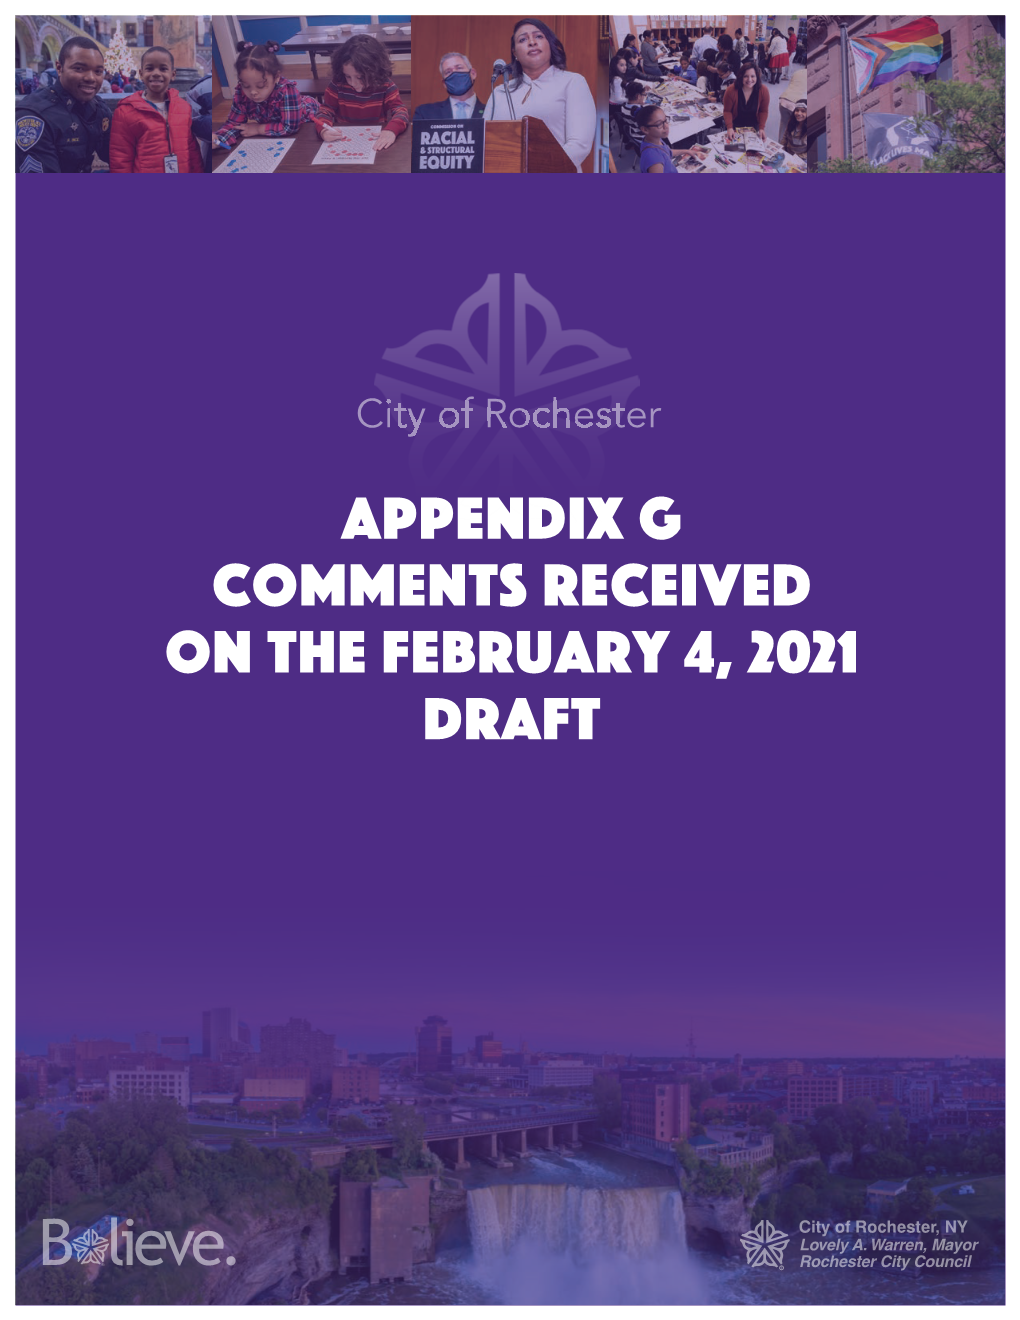 Appendix G Comments Received on the February 4, 2021 Draft